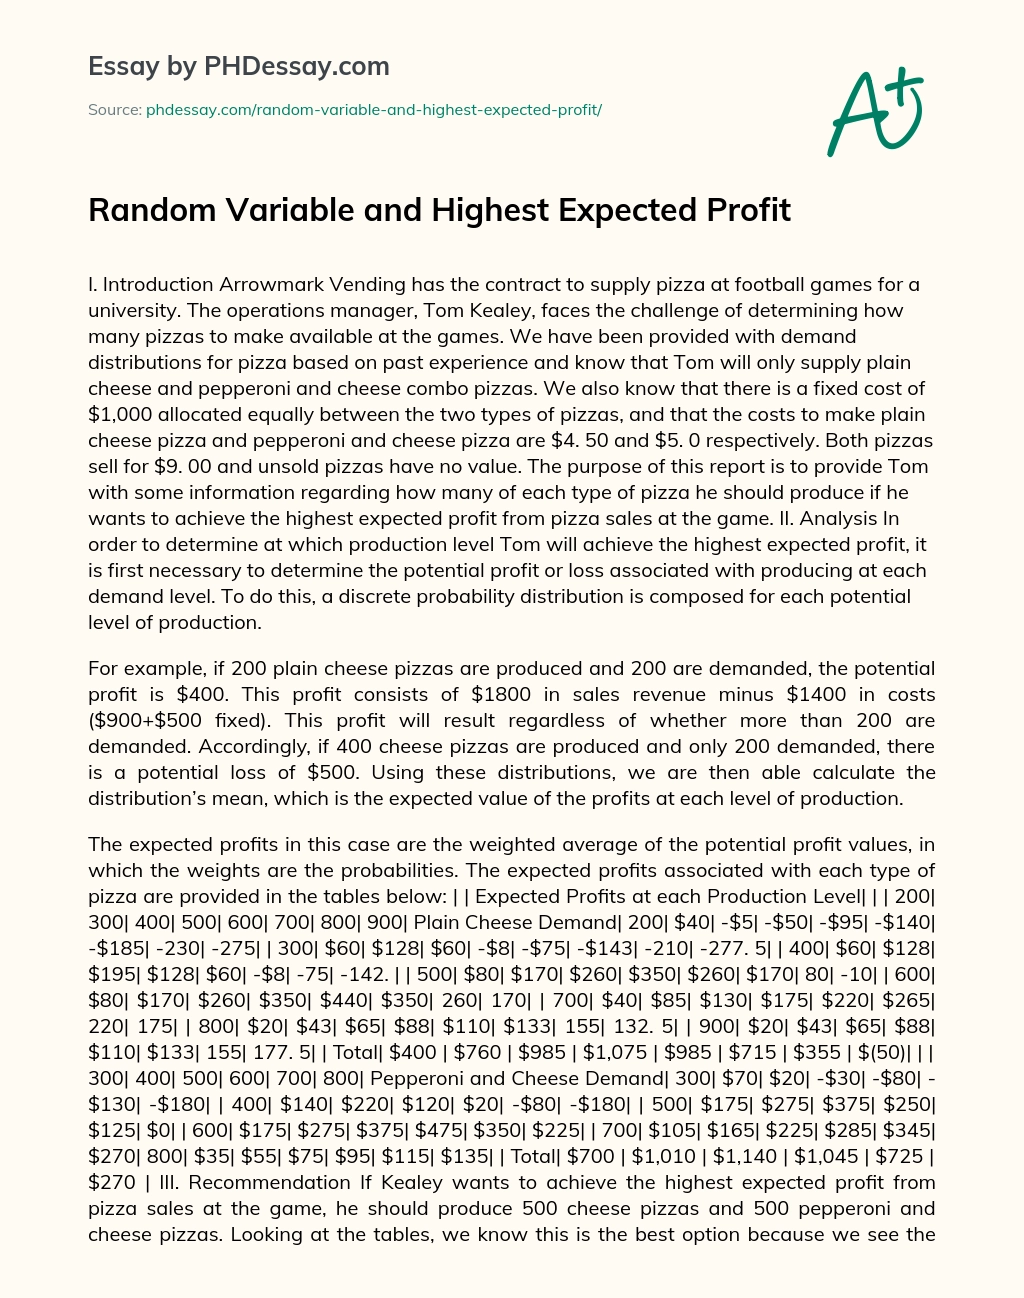 Random Variable and Highest Expected Profit essay